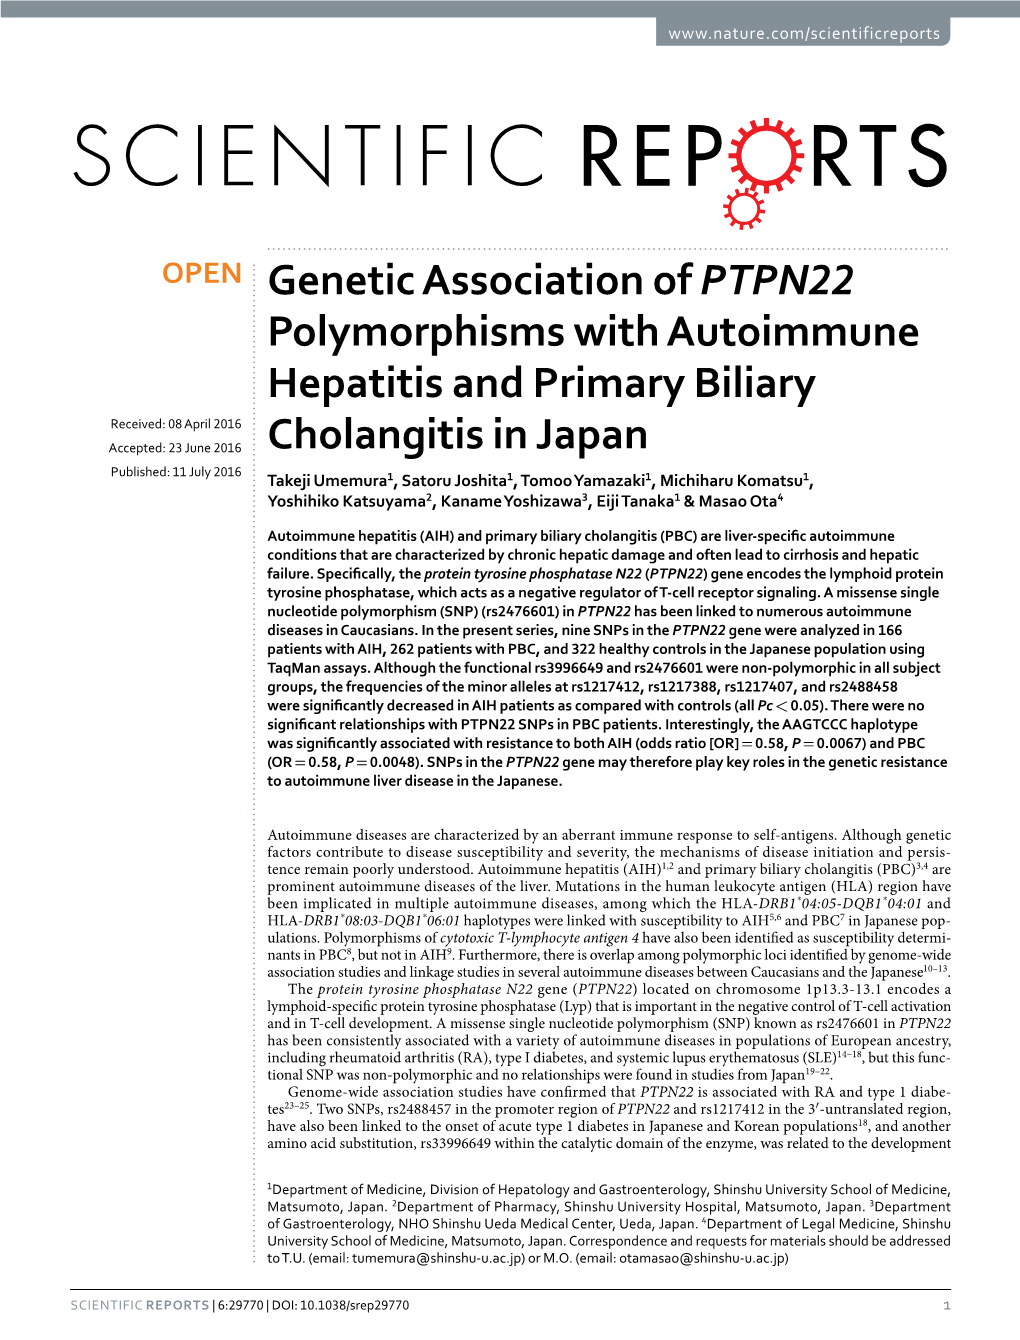 Genetic Association of PTPN22 Polymorphisms with Autoimmune